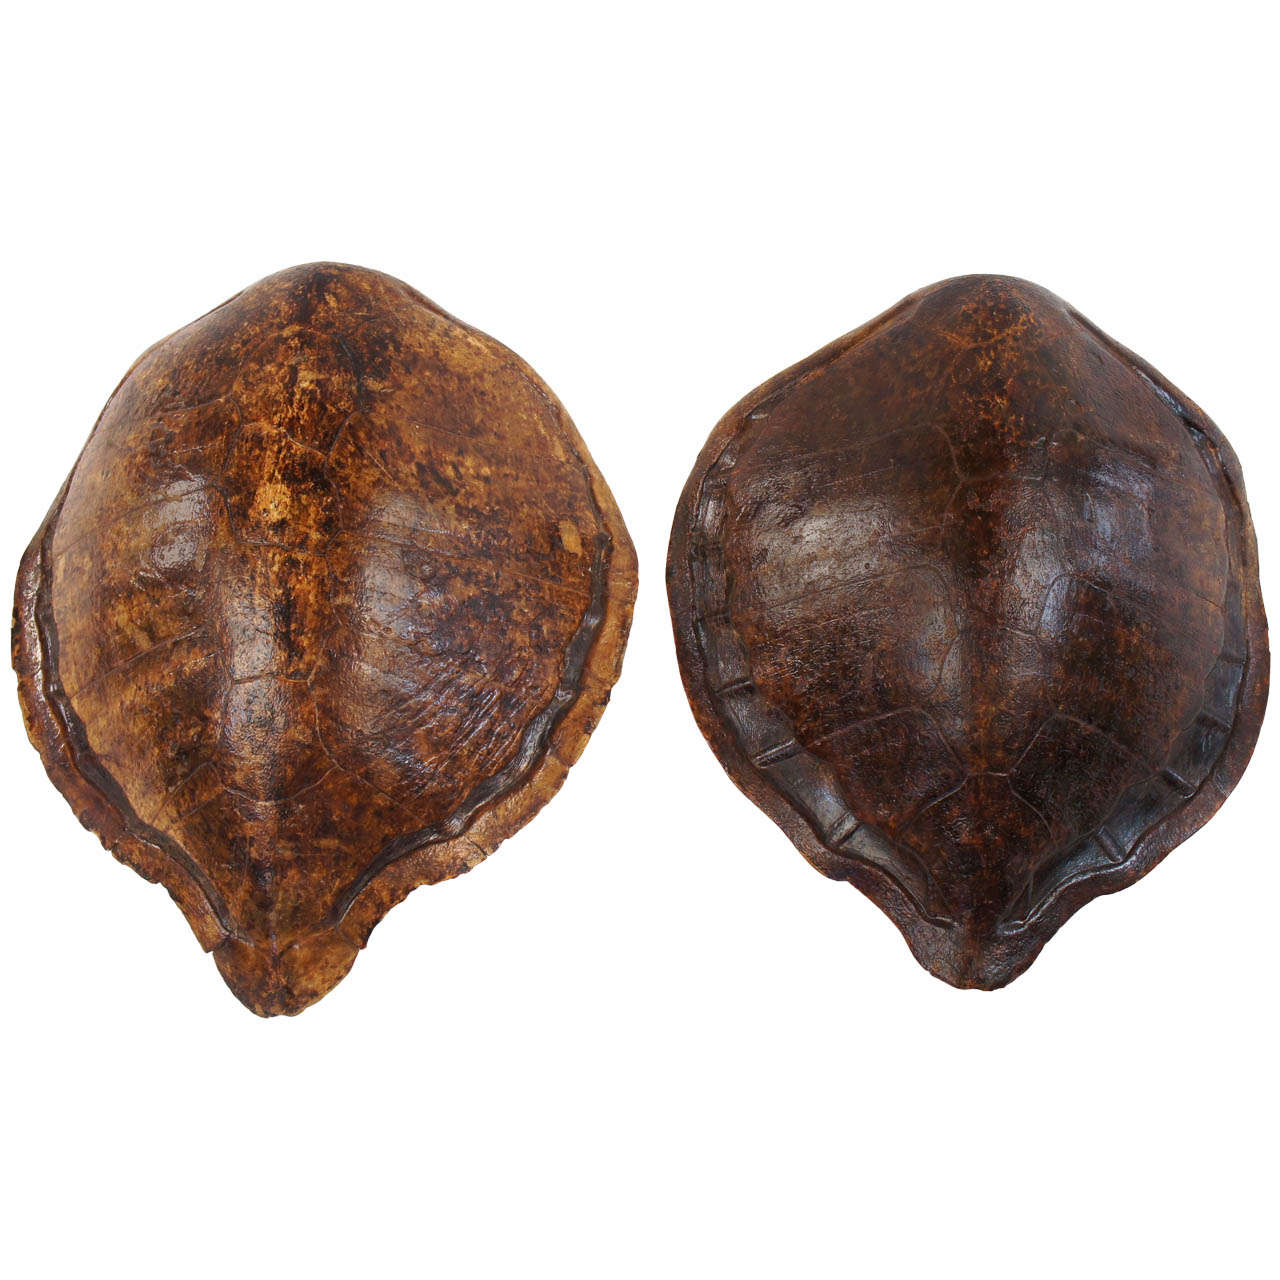 Two Large Marine Turtle Shells or Carapaces, 19th Century